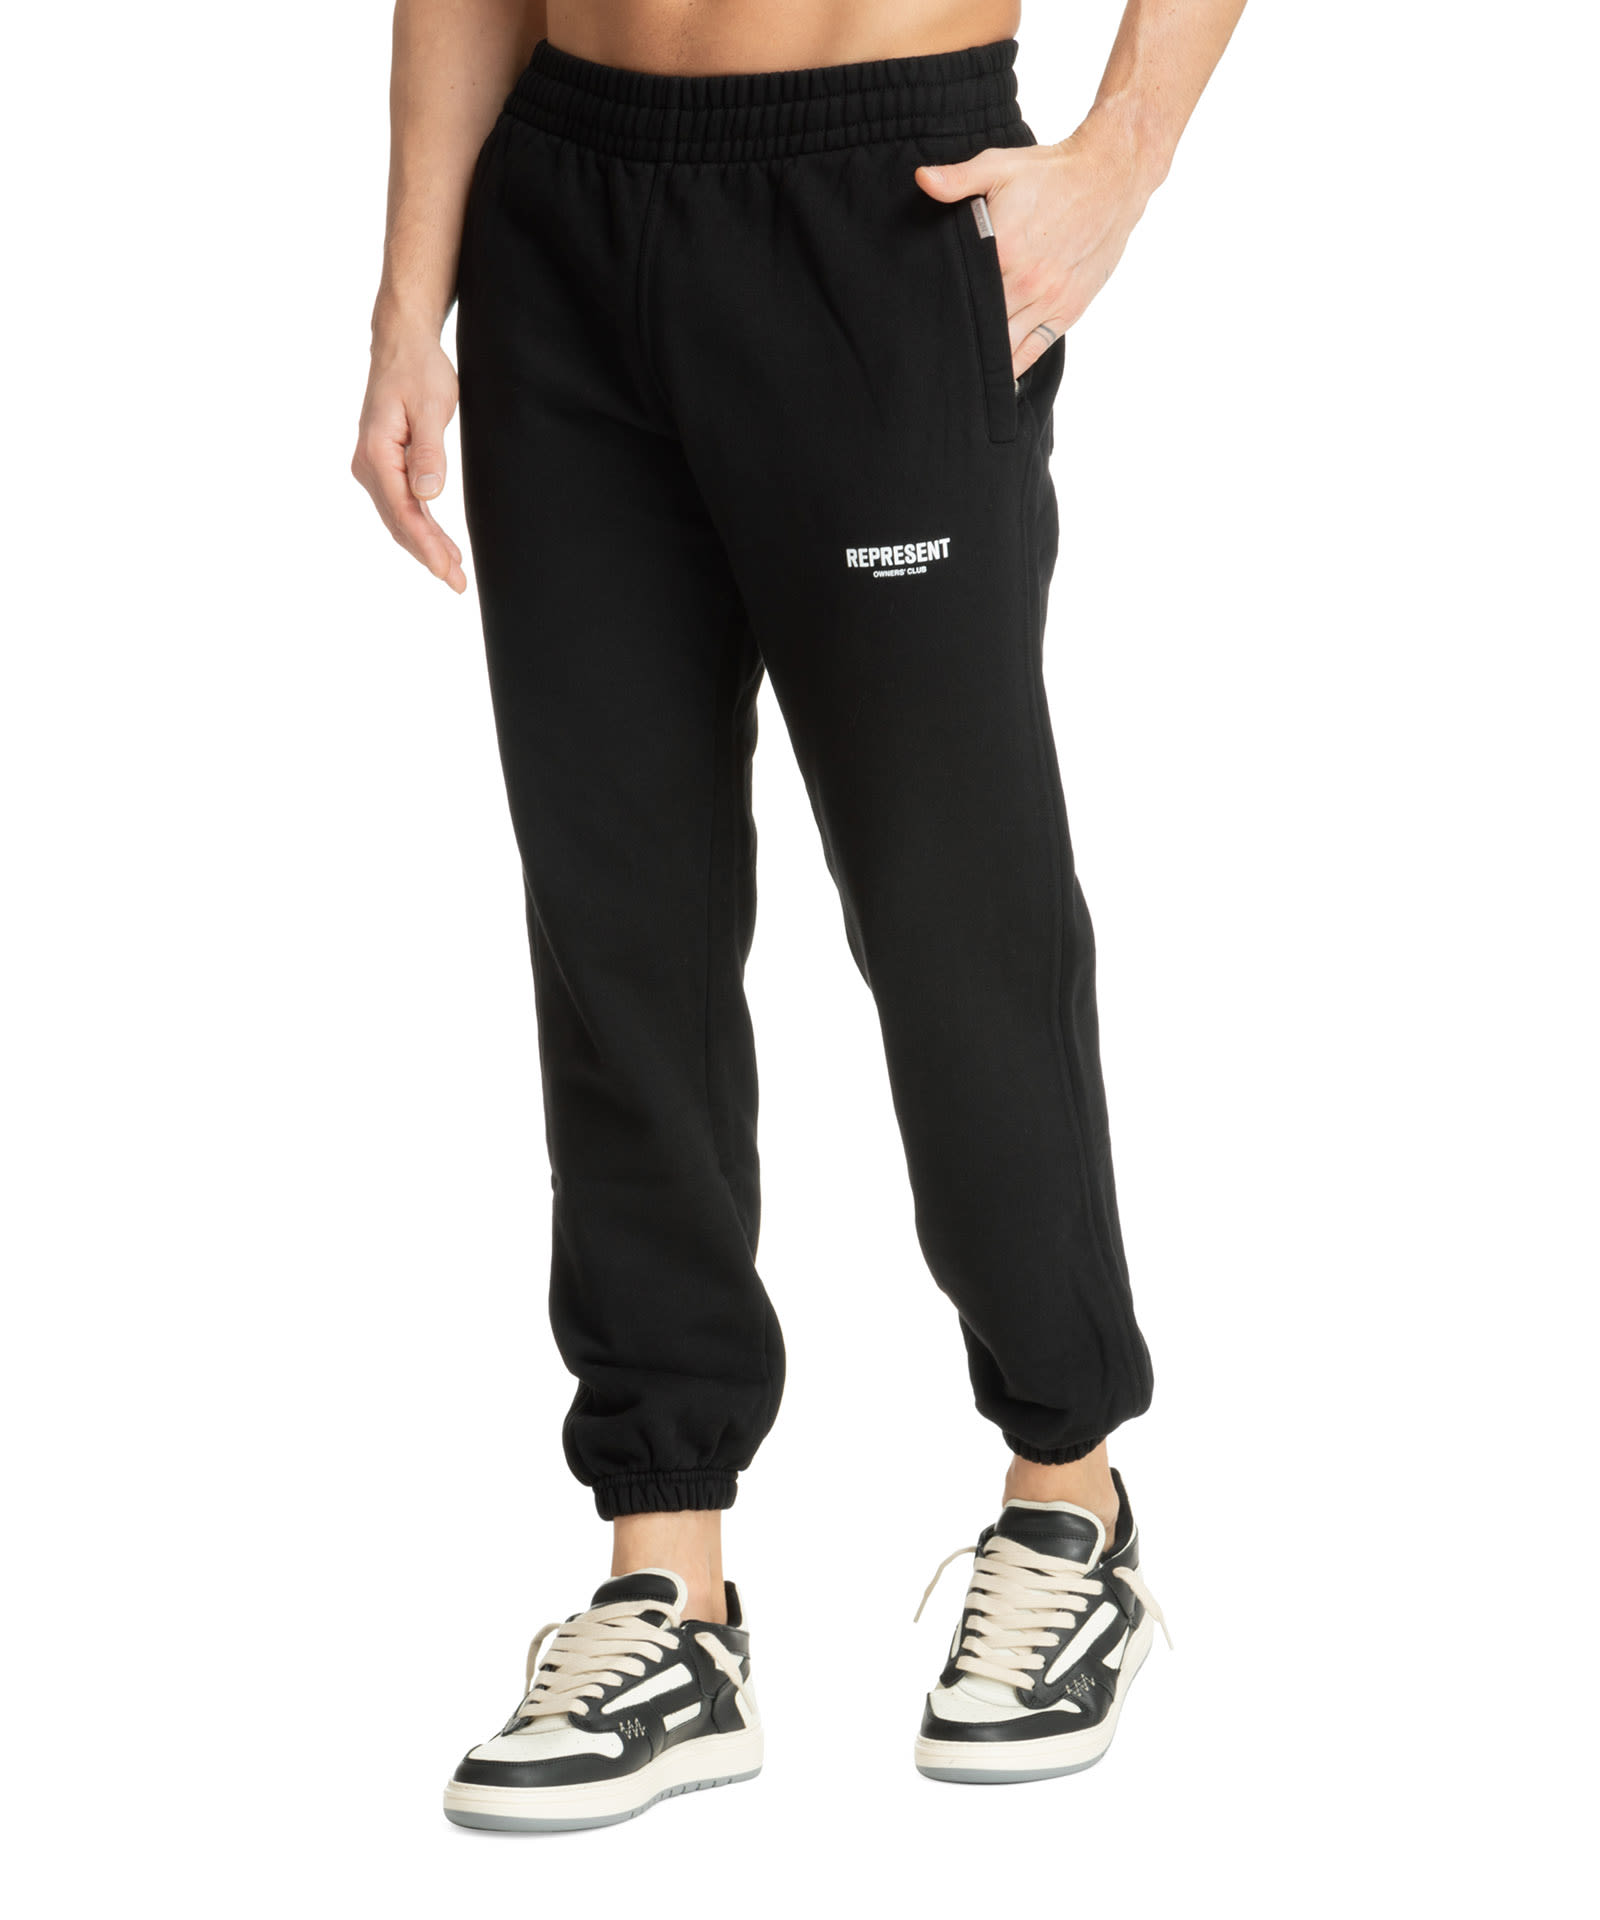 Owners Club Cotton Sweatpants